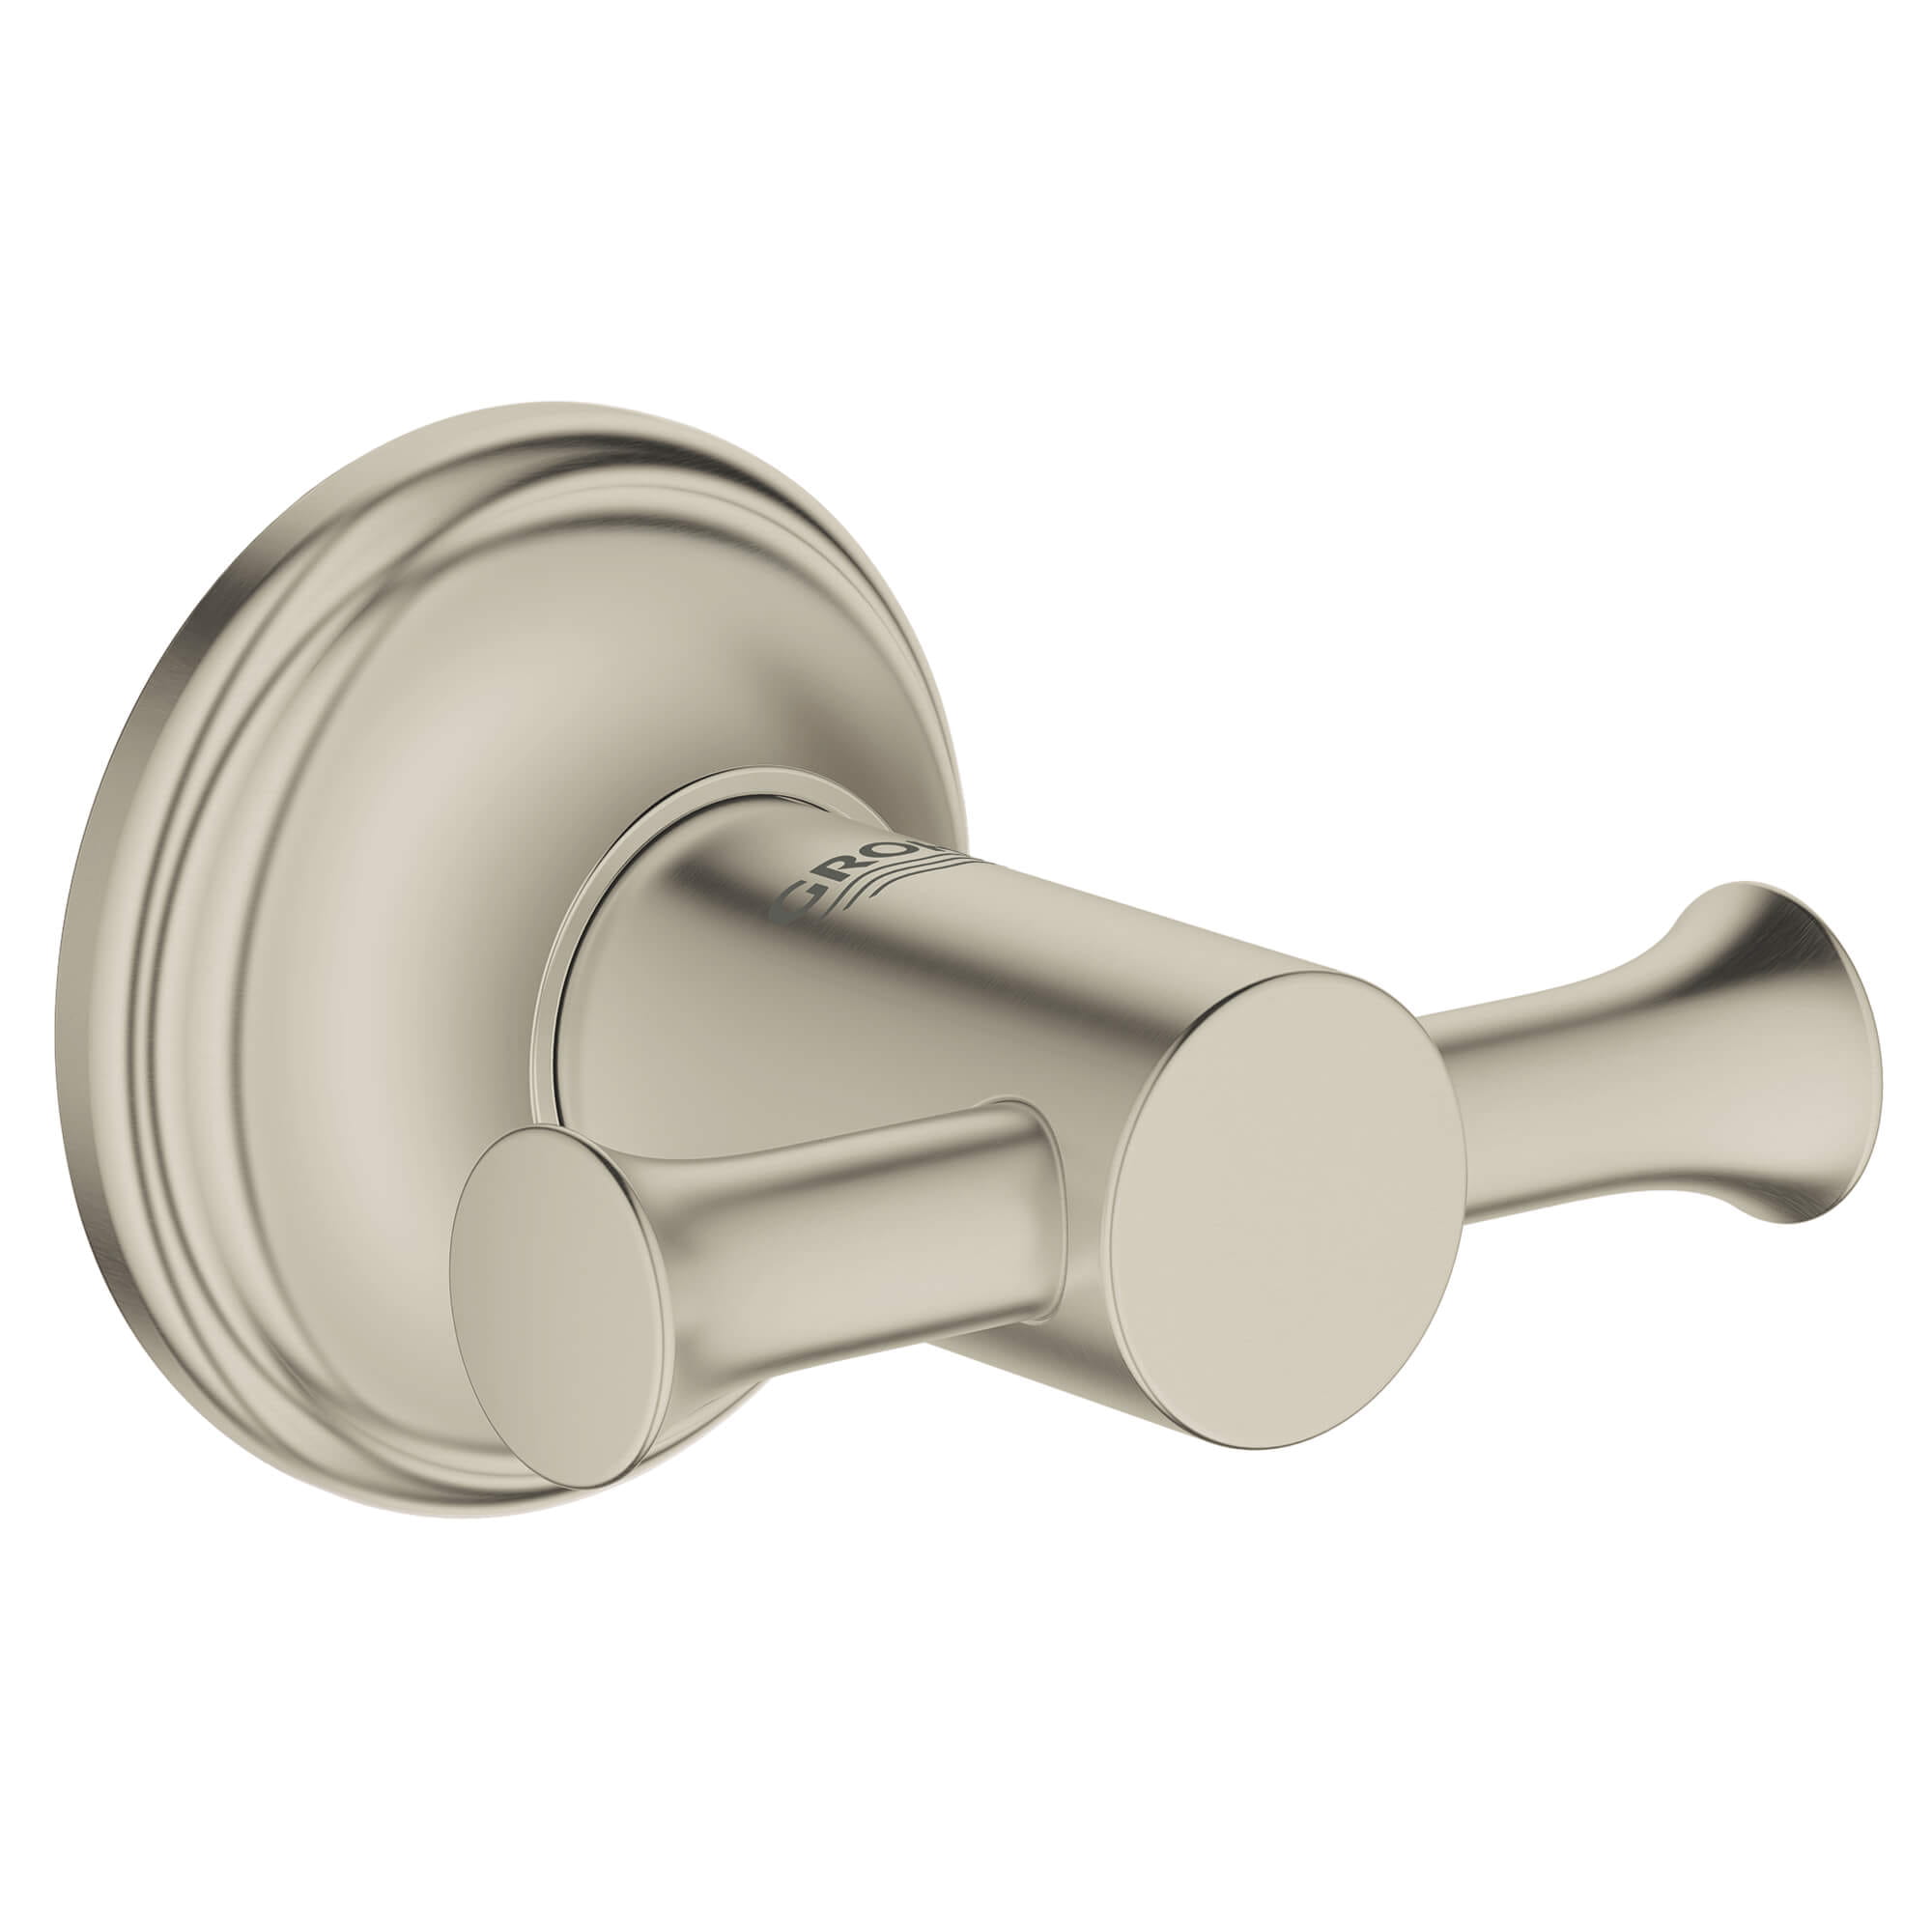 Essentials Authentic Crochet GROHE BRUSHED NICKEL